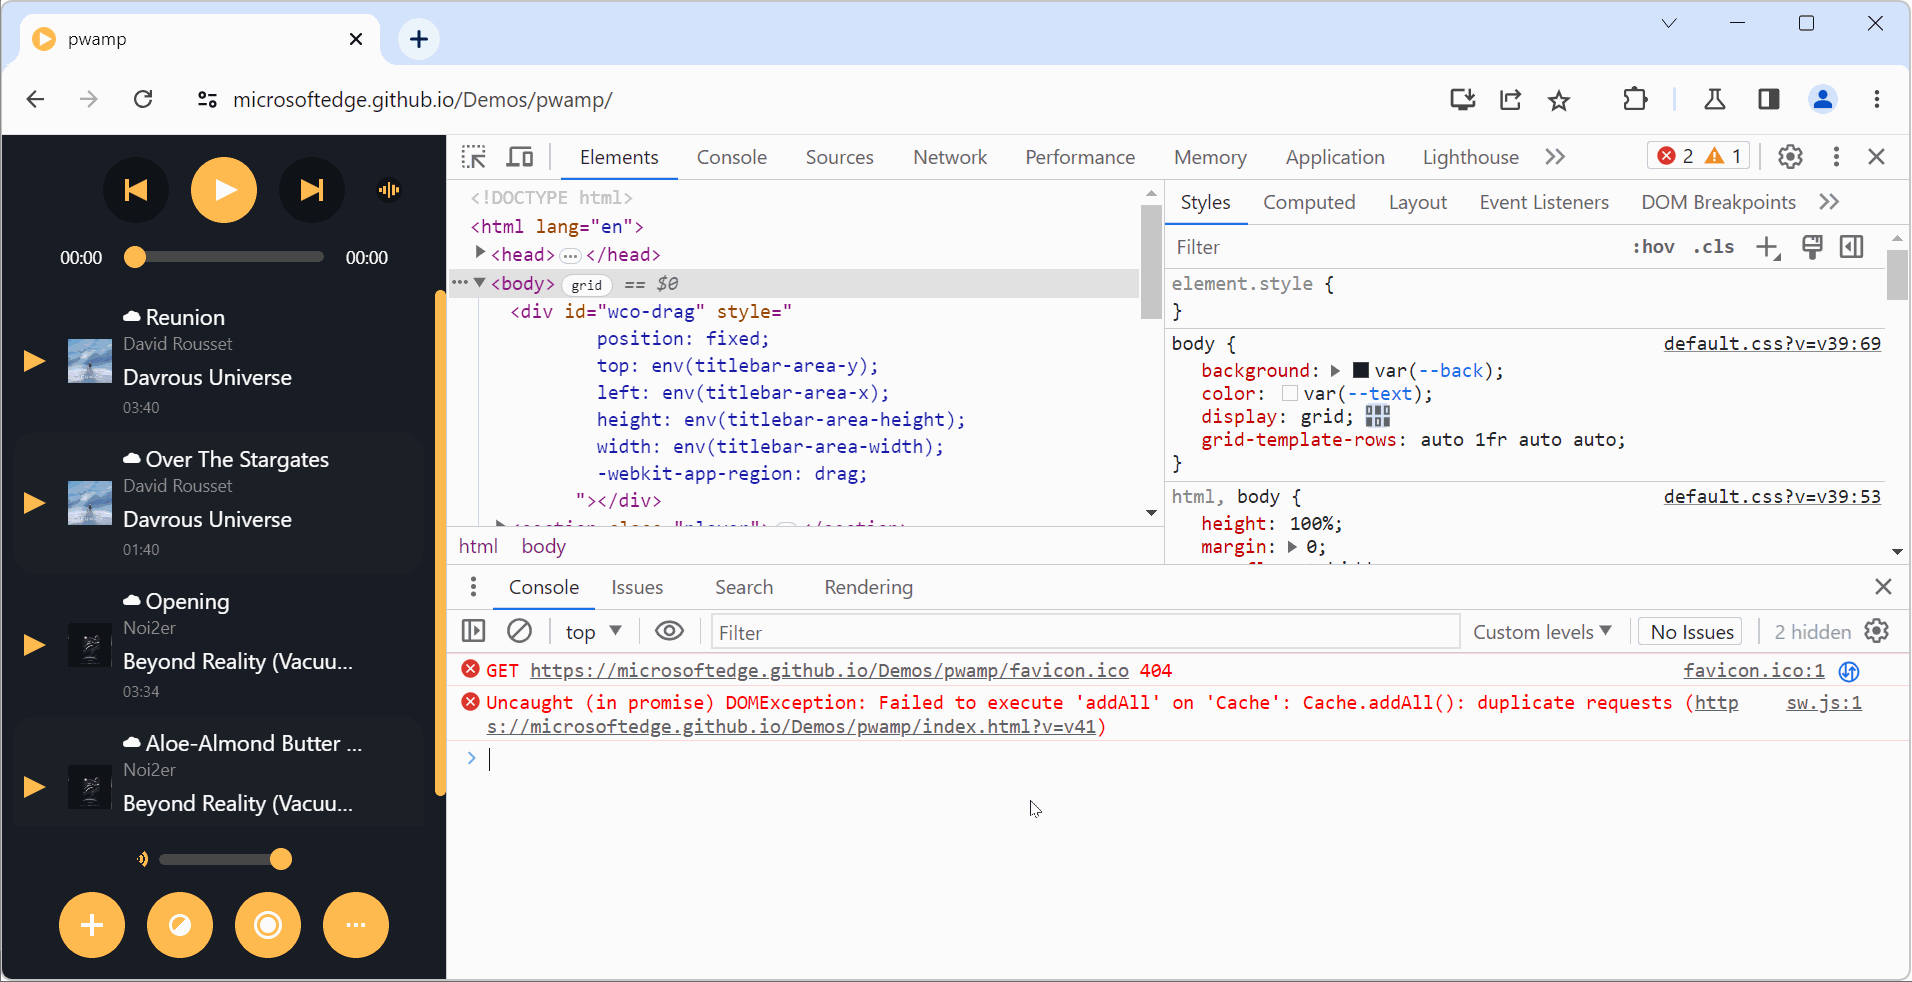 DevTools with the Console in the drawer, hiding and appearing again when the user selects the Console in the main panel and then goes back to the Elements tool